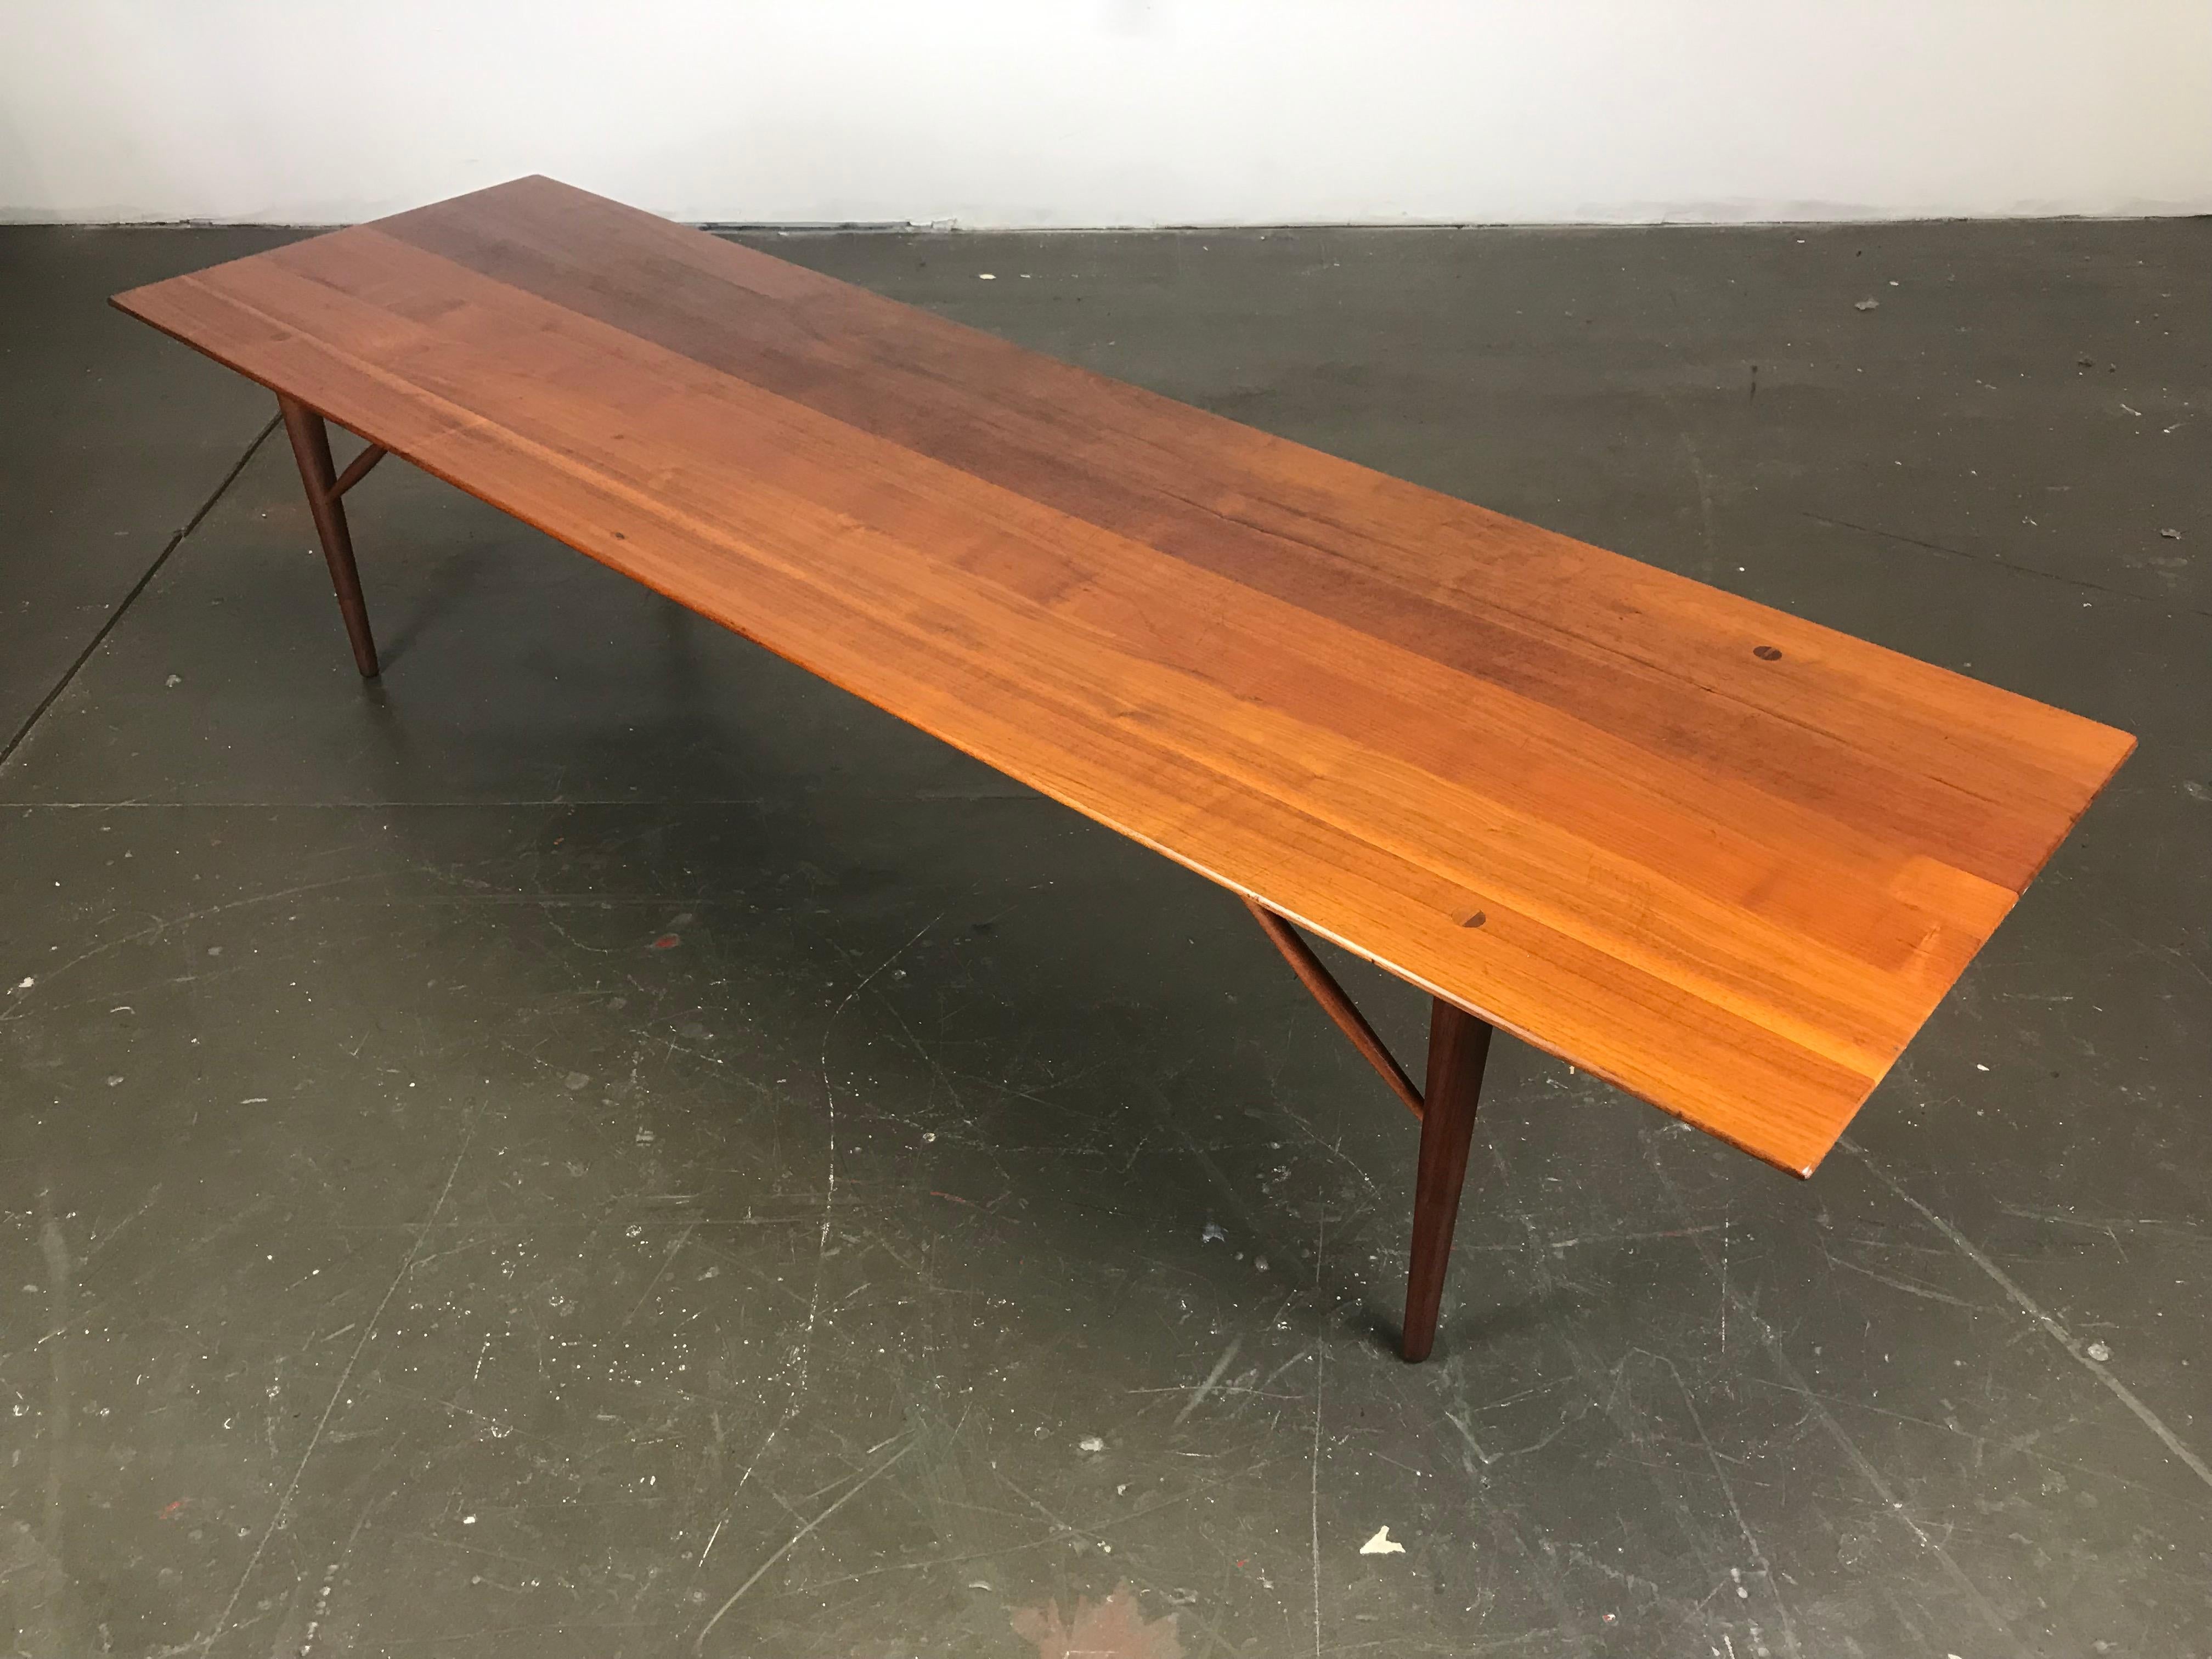 Excellent solid plank walnut coffee table by Kipp Stewart & Stewart MacDougall for Winchendon Furniture Co. Lovely detailed wood dowels where each of the four legs go into the top. Great bracketing underneath with a flair of angled spindles that